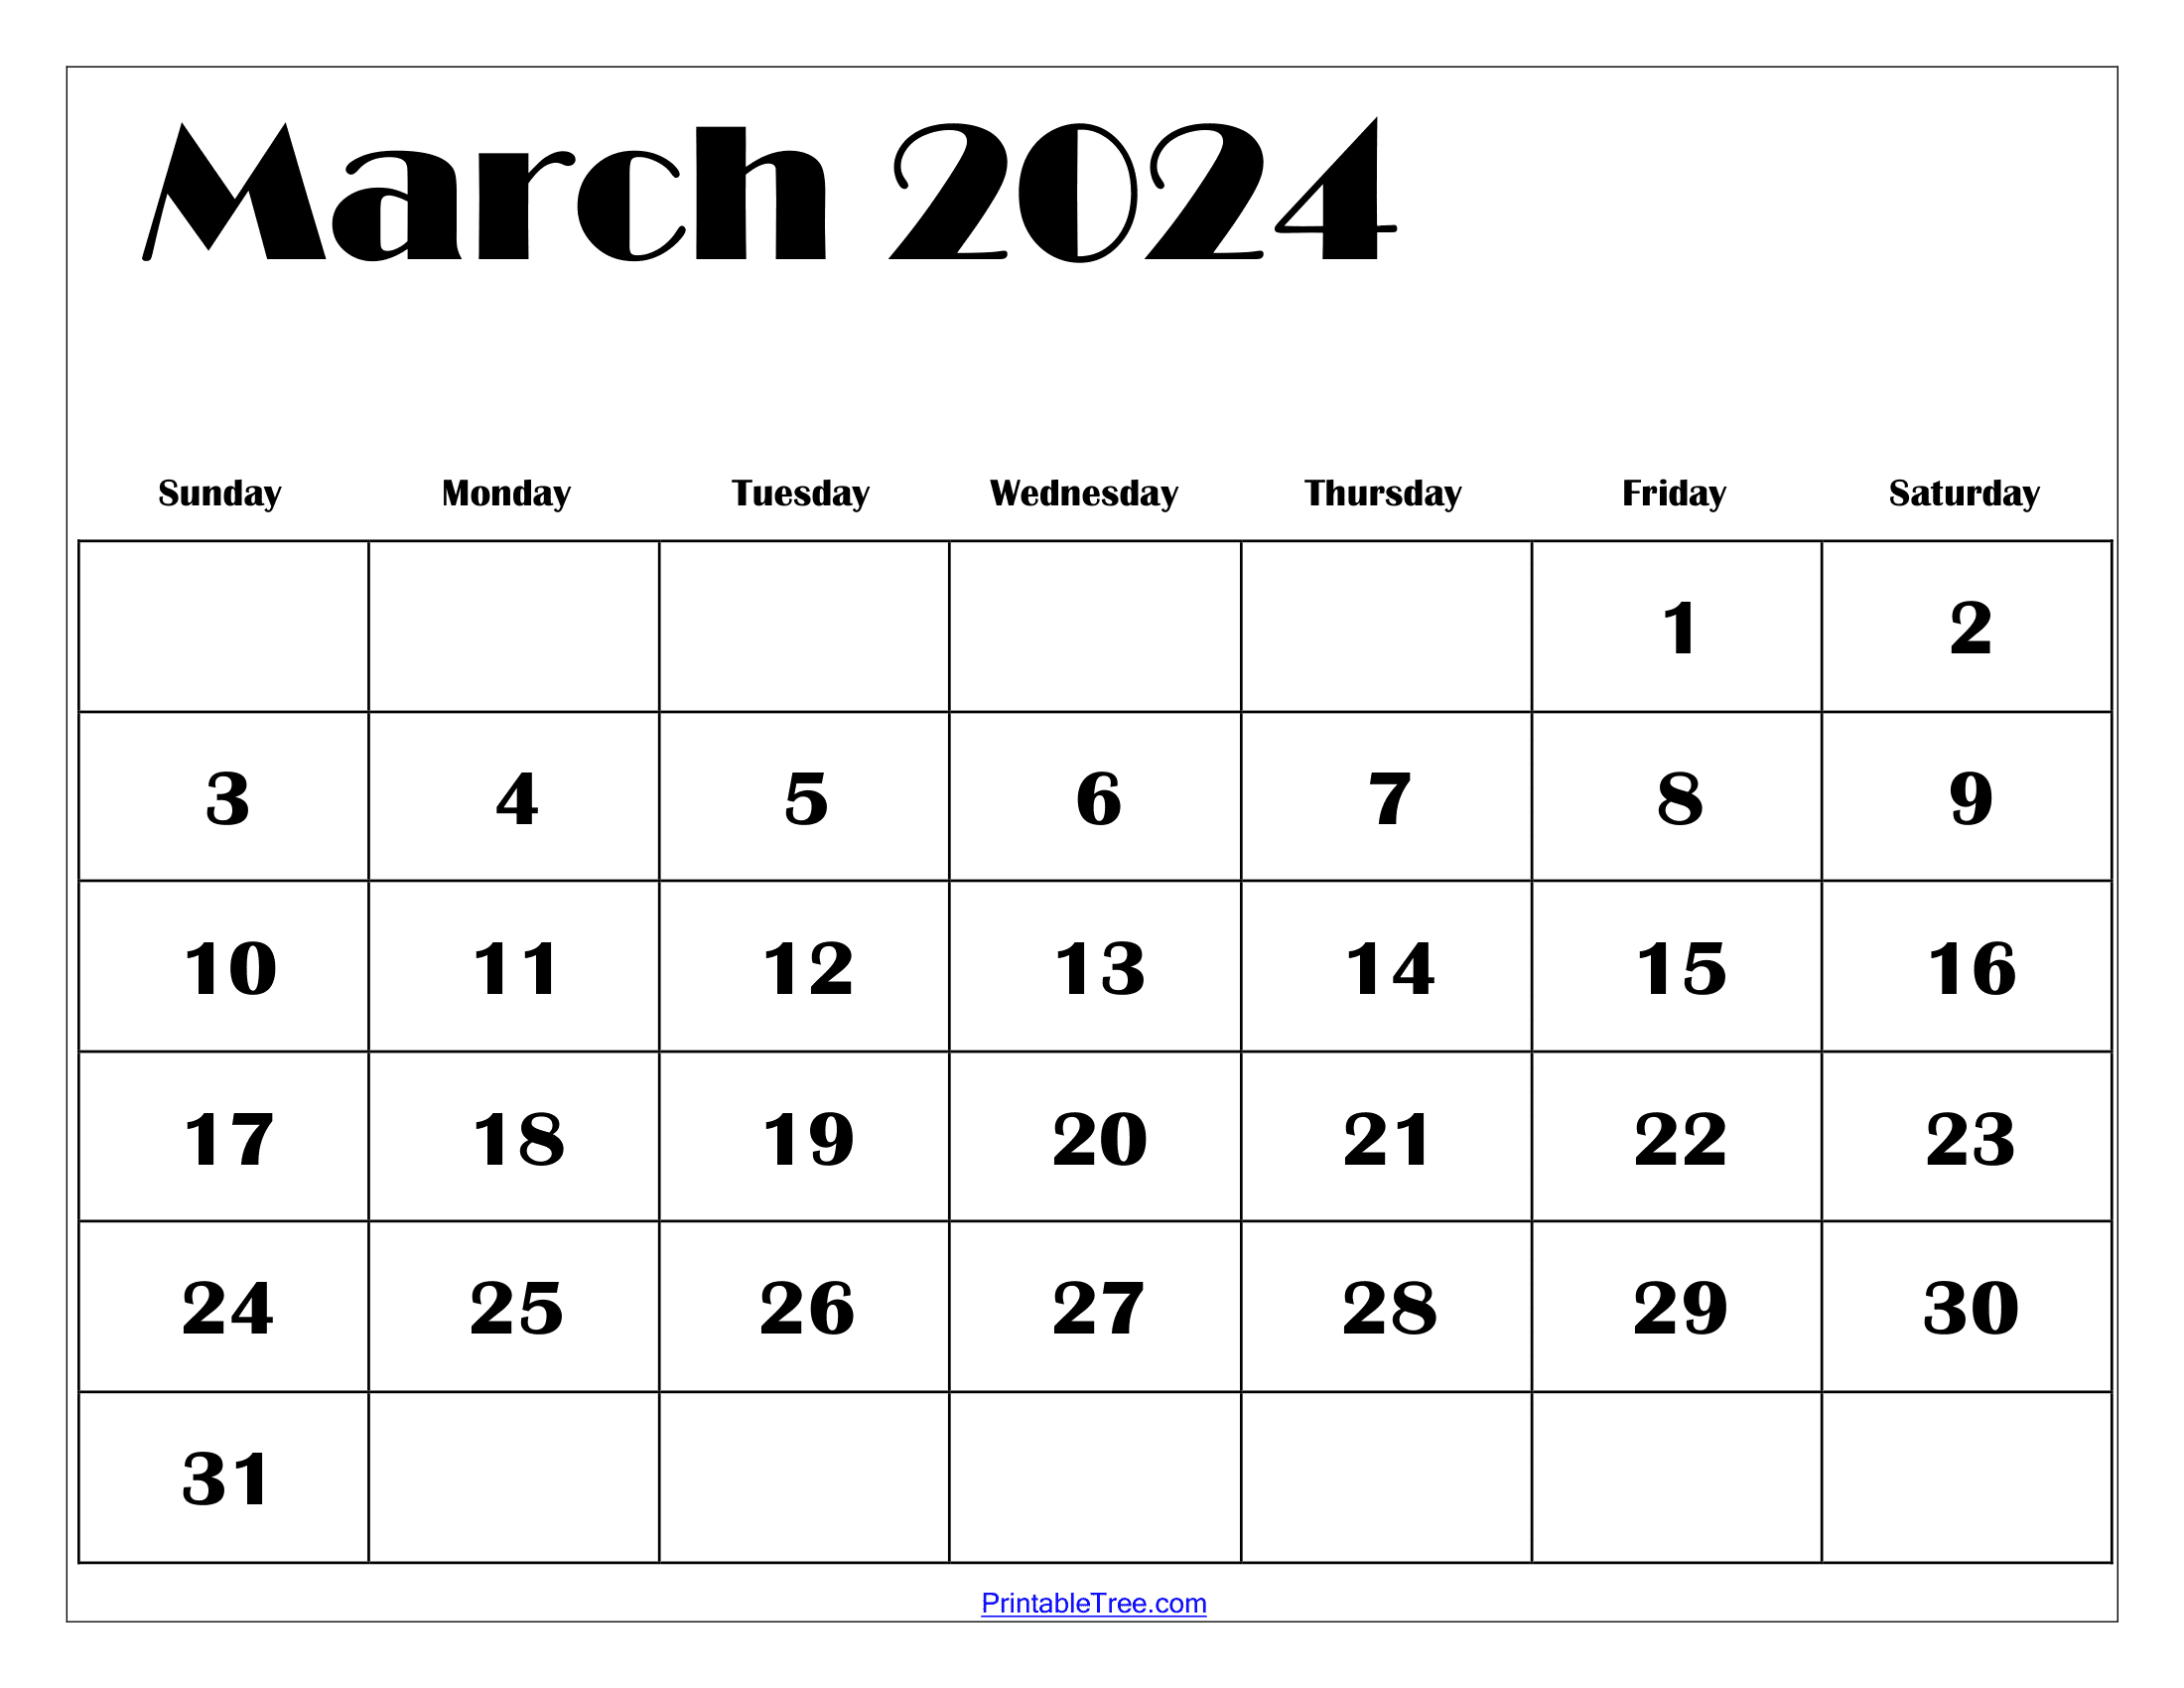 March 2024 Calendar Printable Pdf With Holidays Template Free for Free Printable Monthly Calendar March 2024